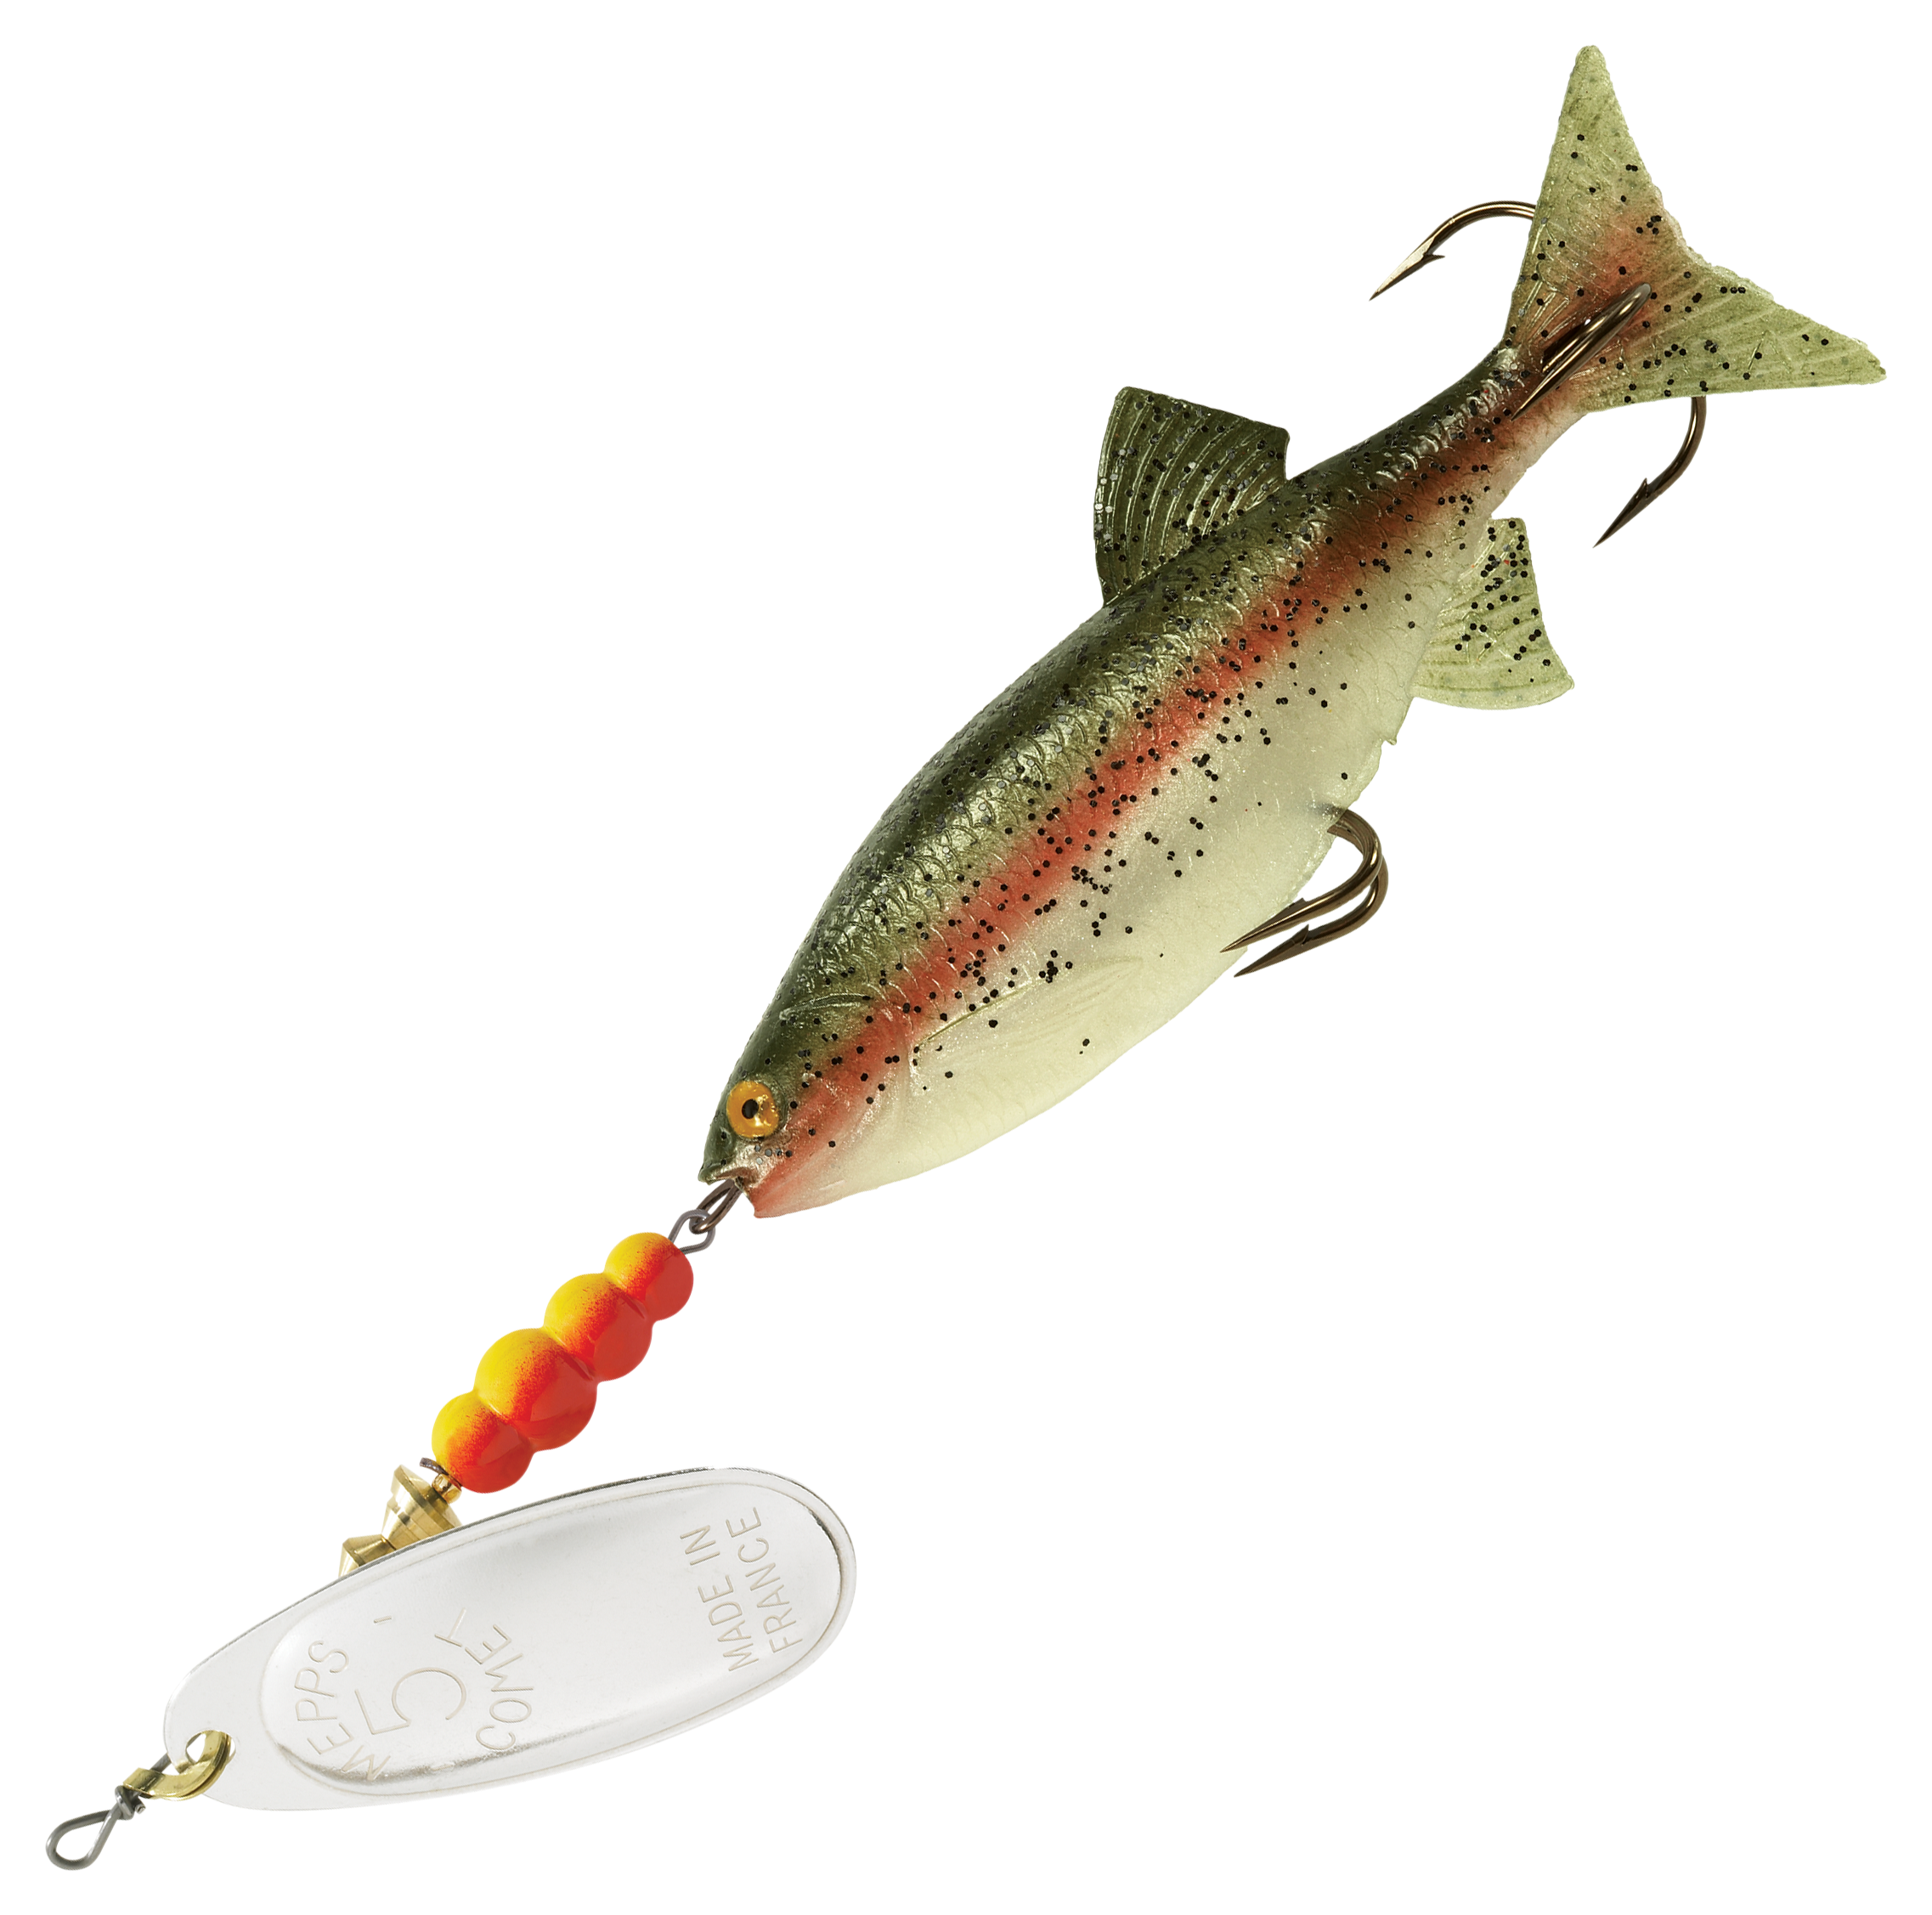 Mepp's Comet Mino - Shad Size: #1 (1/6 oz.); Color: Gold, one Size (C1M G)